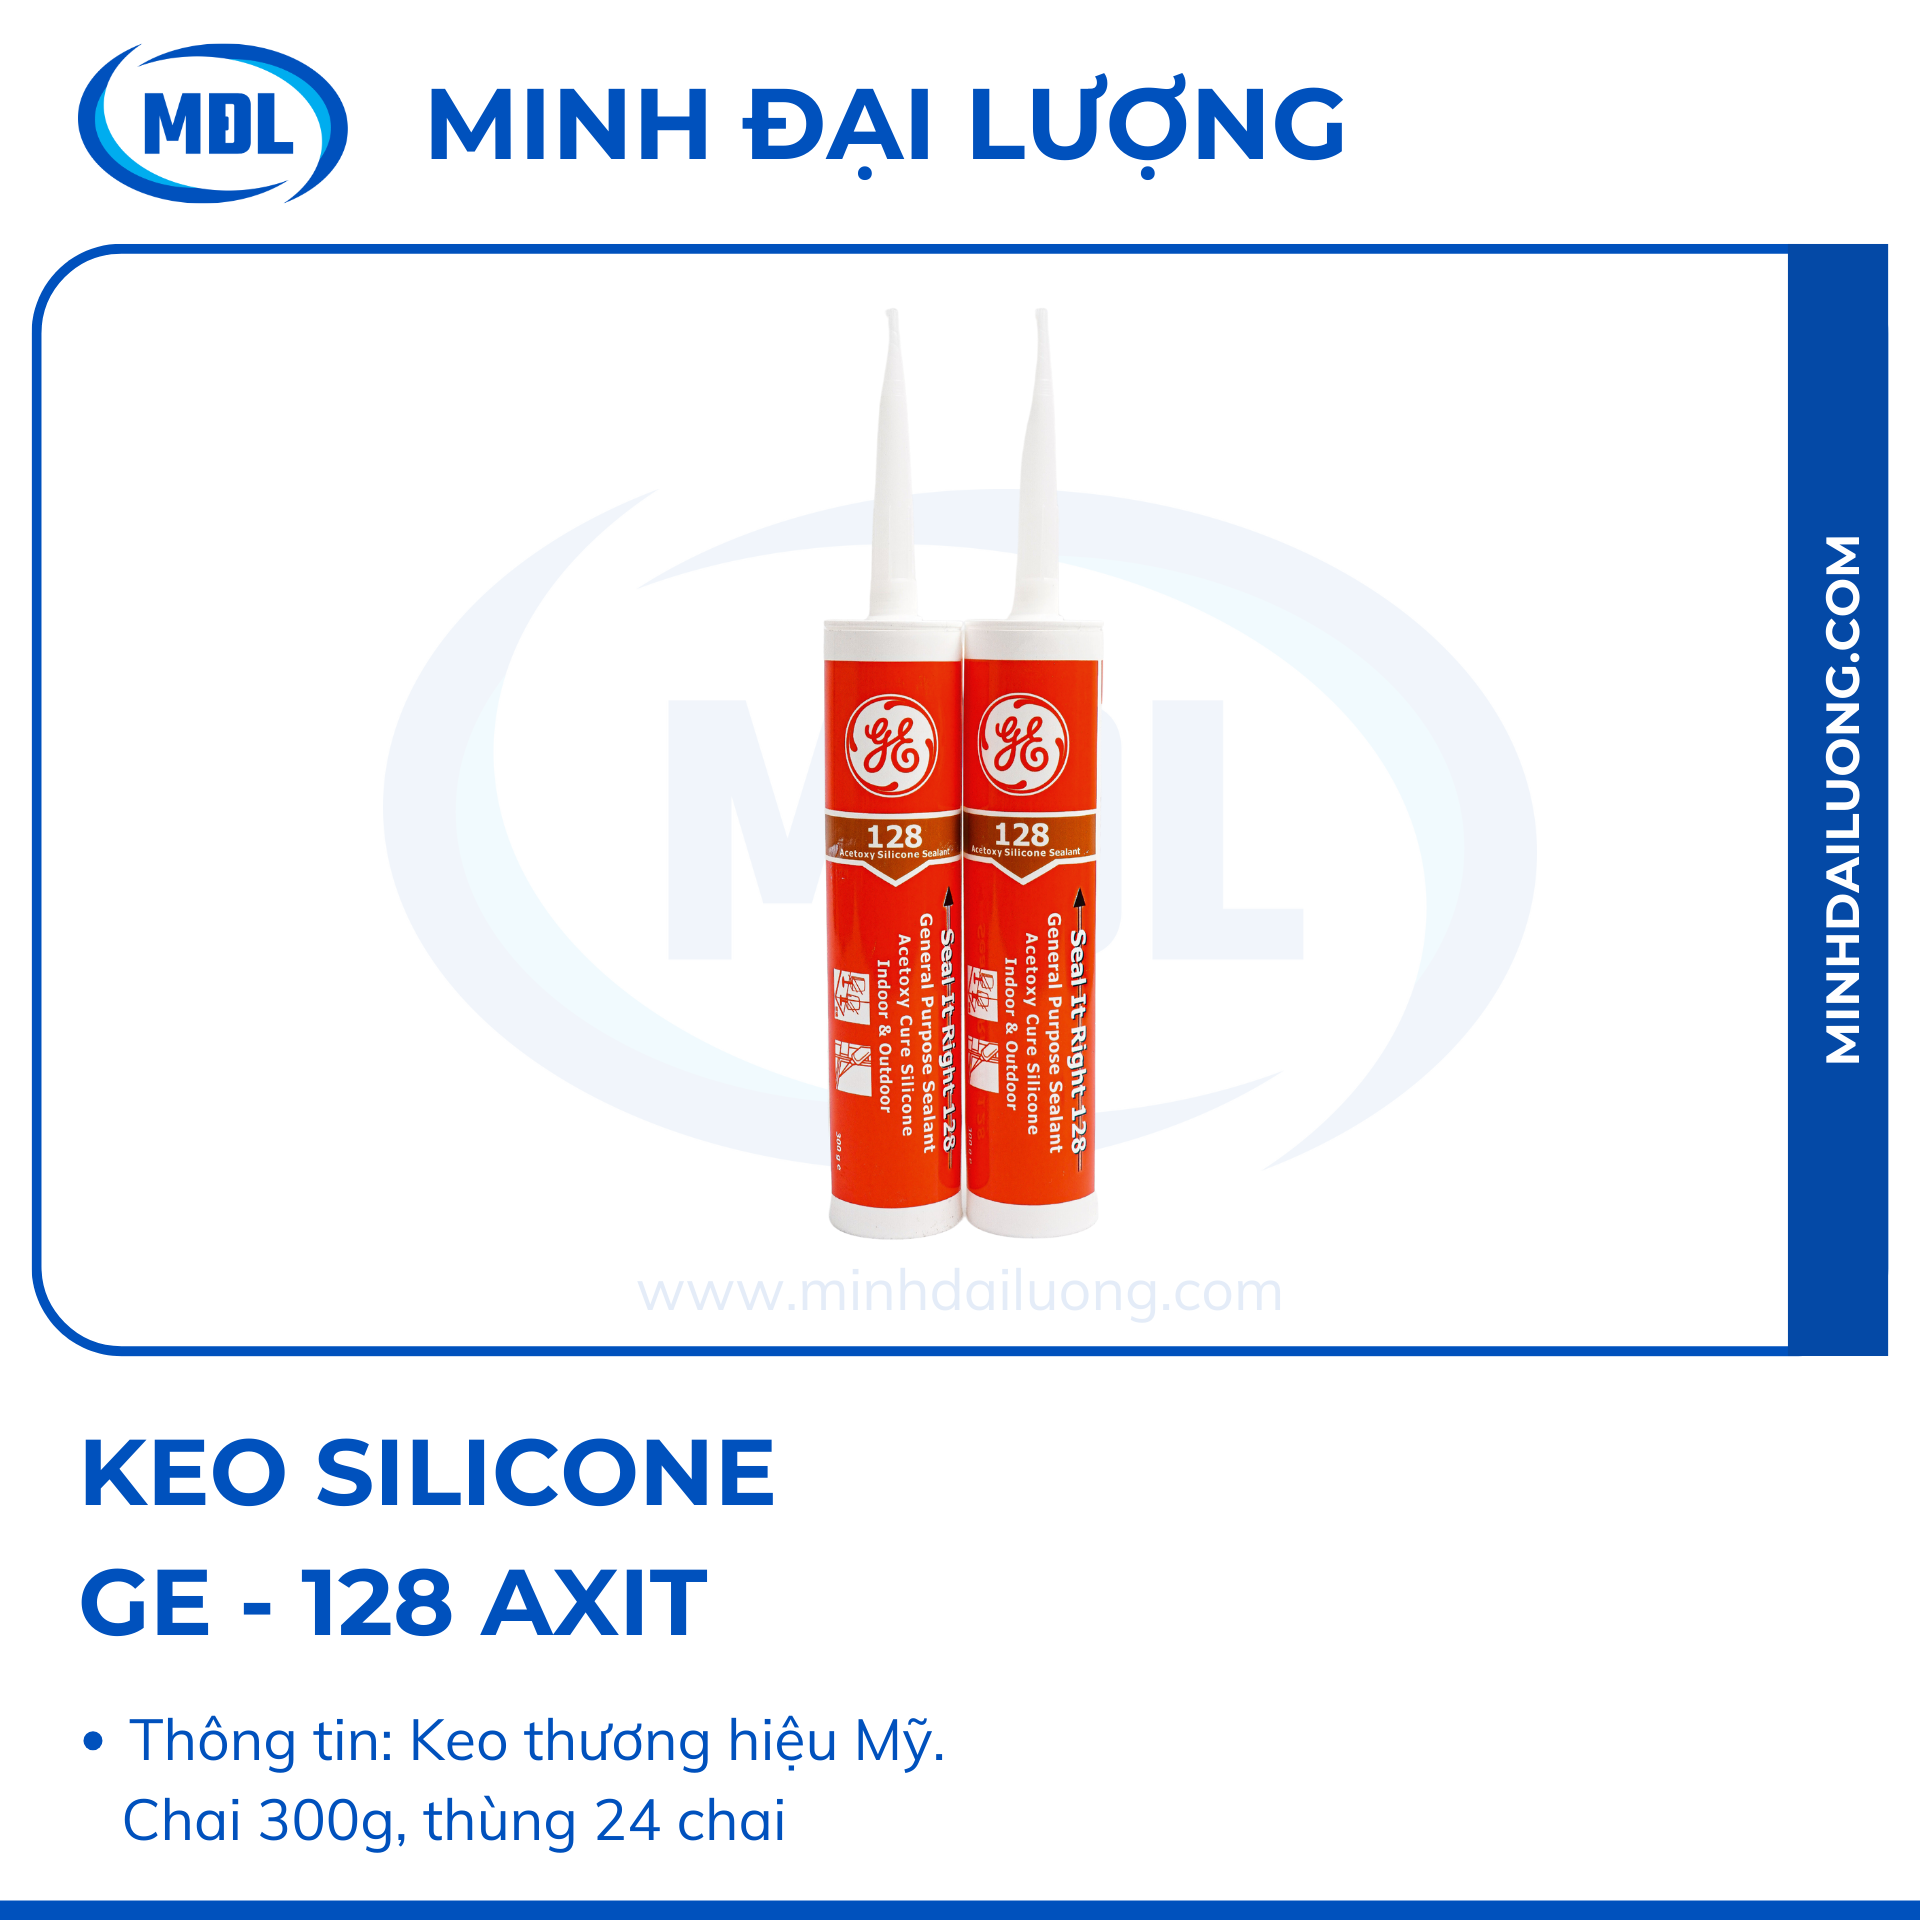 Keo silicone GE 128 axit